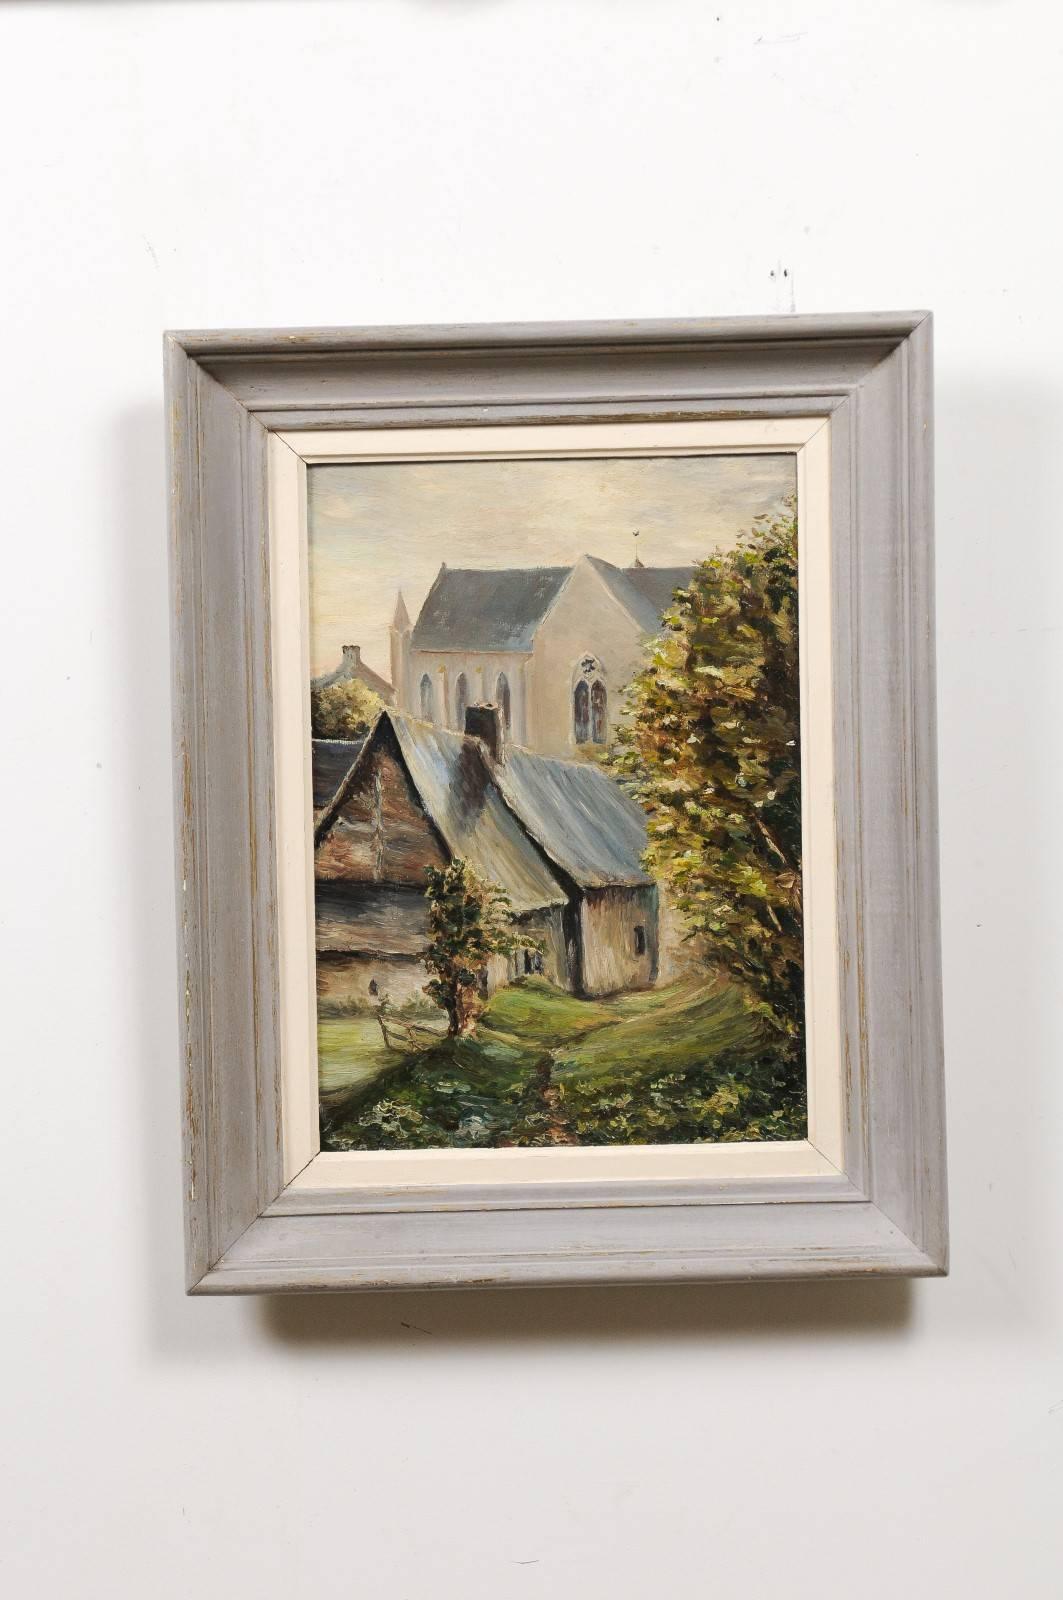 A French 19th century oil on wood landscape painting depicting a church in Brittany. This French vertical format painting depicts a scene that takes place in the Westernmost area of France, the spectacular region of Brittany. A church depicted in